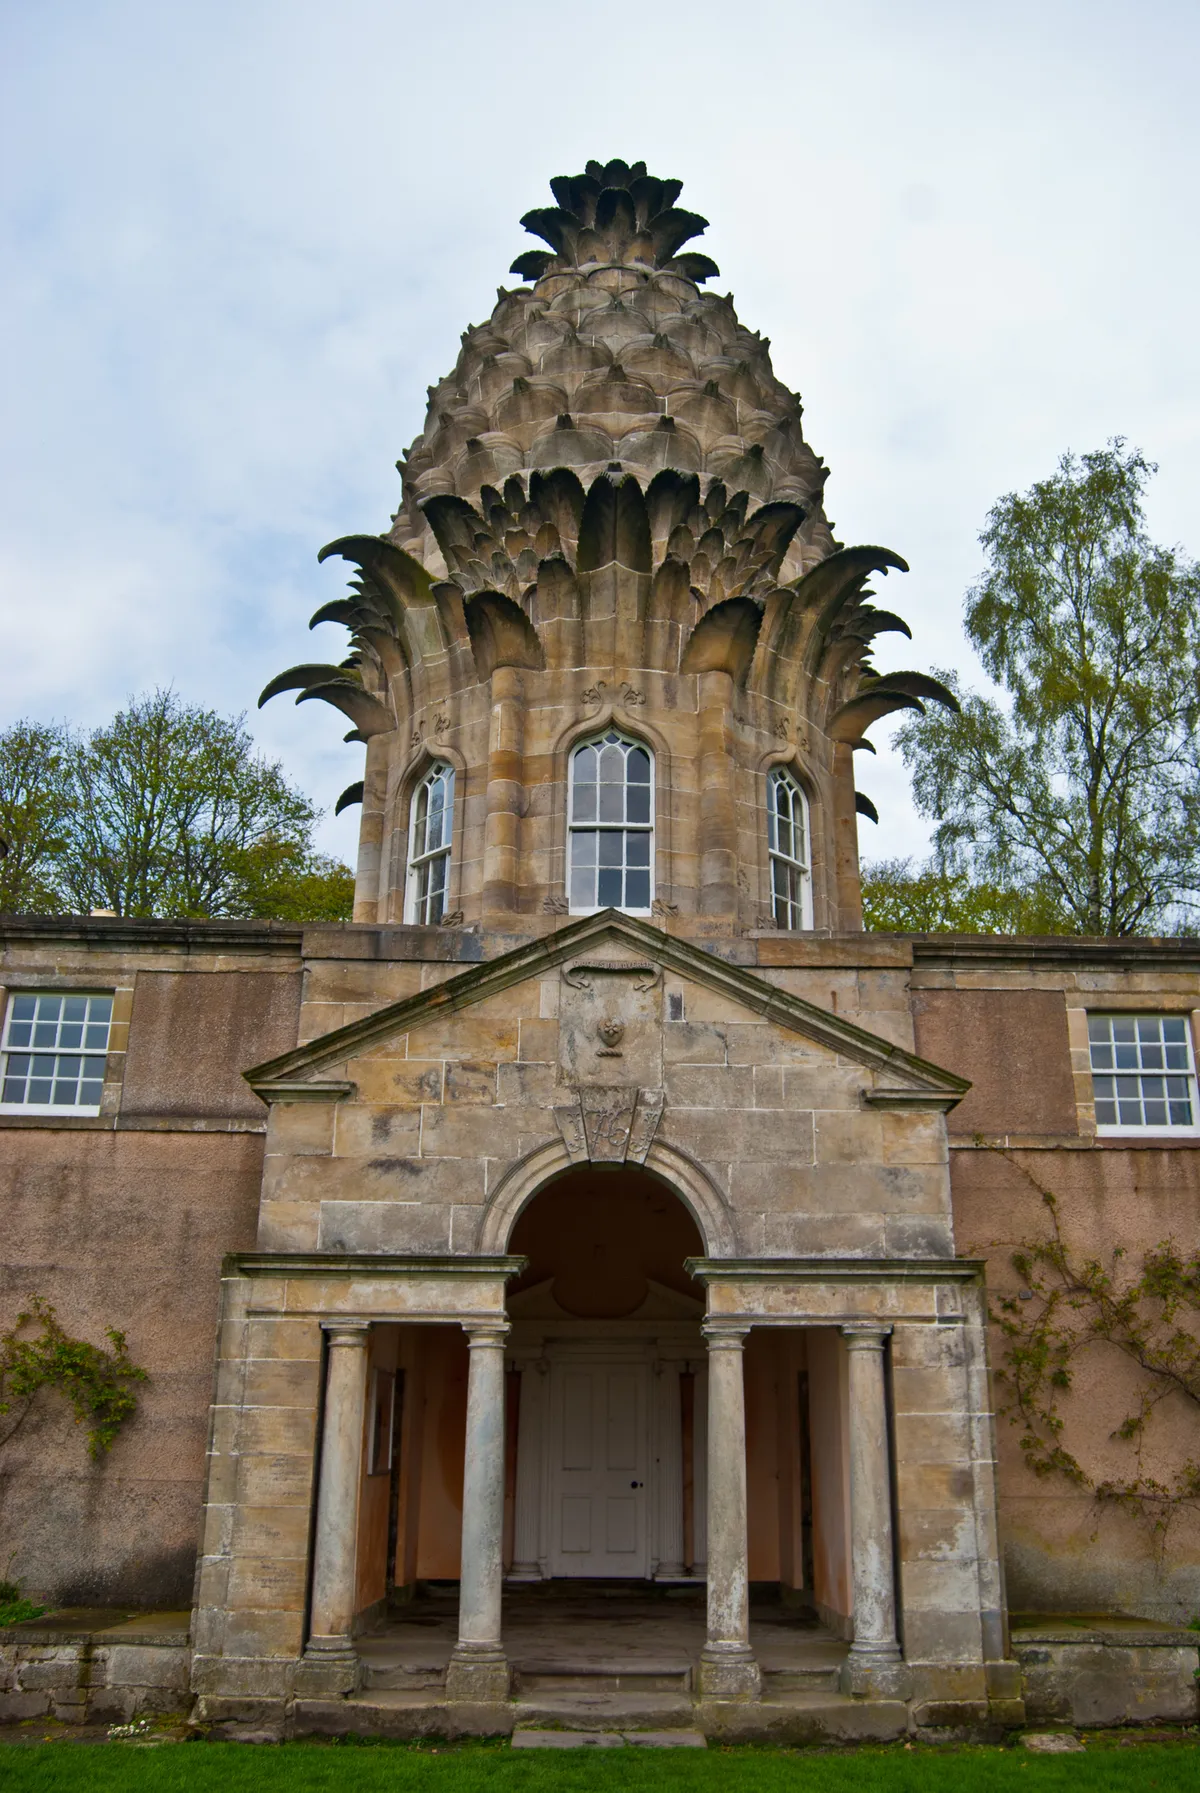 The pinapple Dunmore Park is one of Britain's best follies